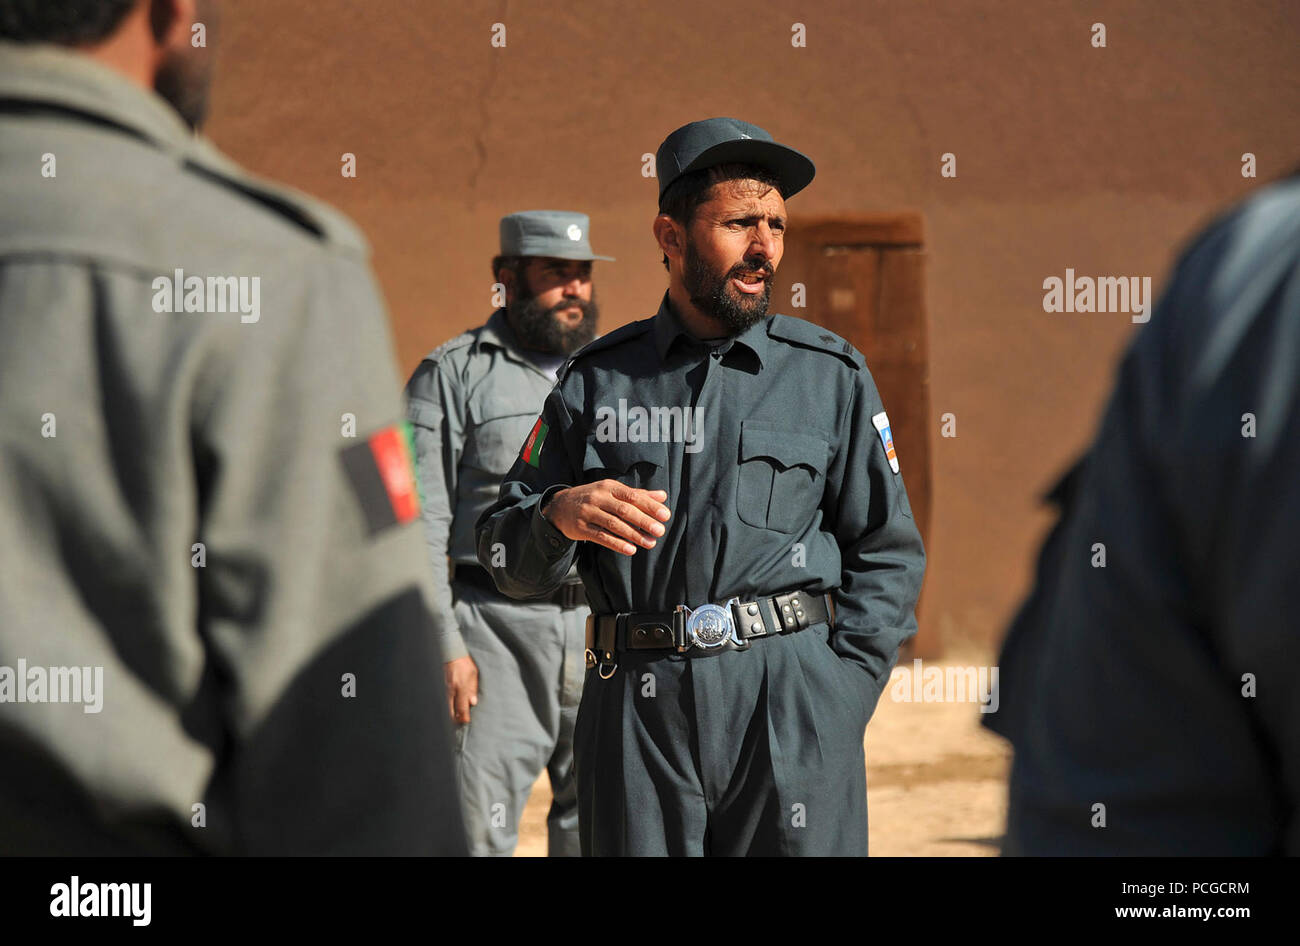 The Afghan Local Police chief, talks to recruits at the ALP academy in Gizab district, Uruzgan province, Afghanistan, Dec. 29. The ALP is a defensive, community-oriented force that brings security and stability to rural areas of Afghanistan. Stock Photo